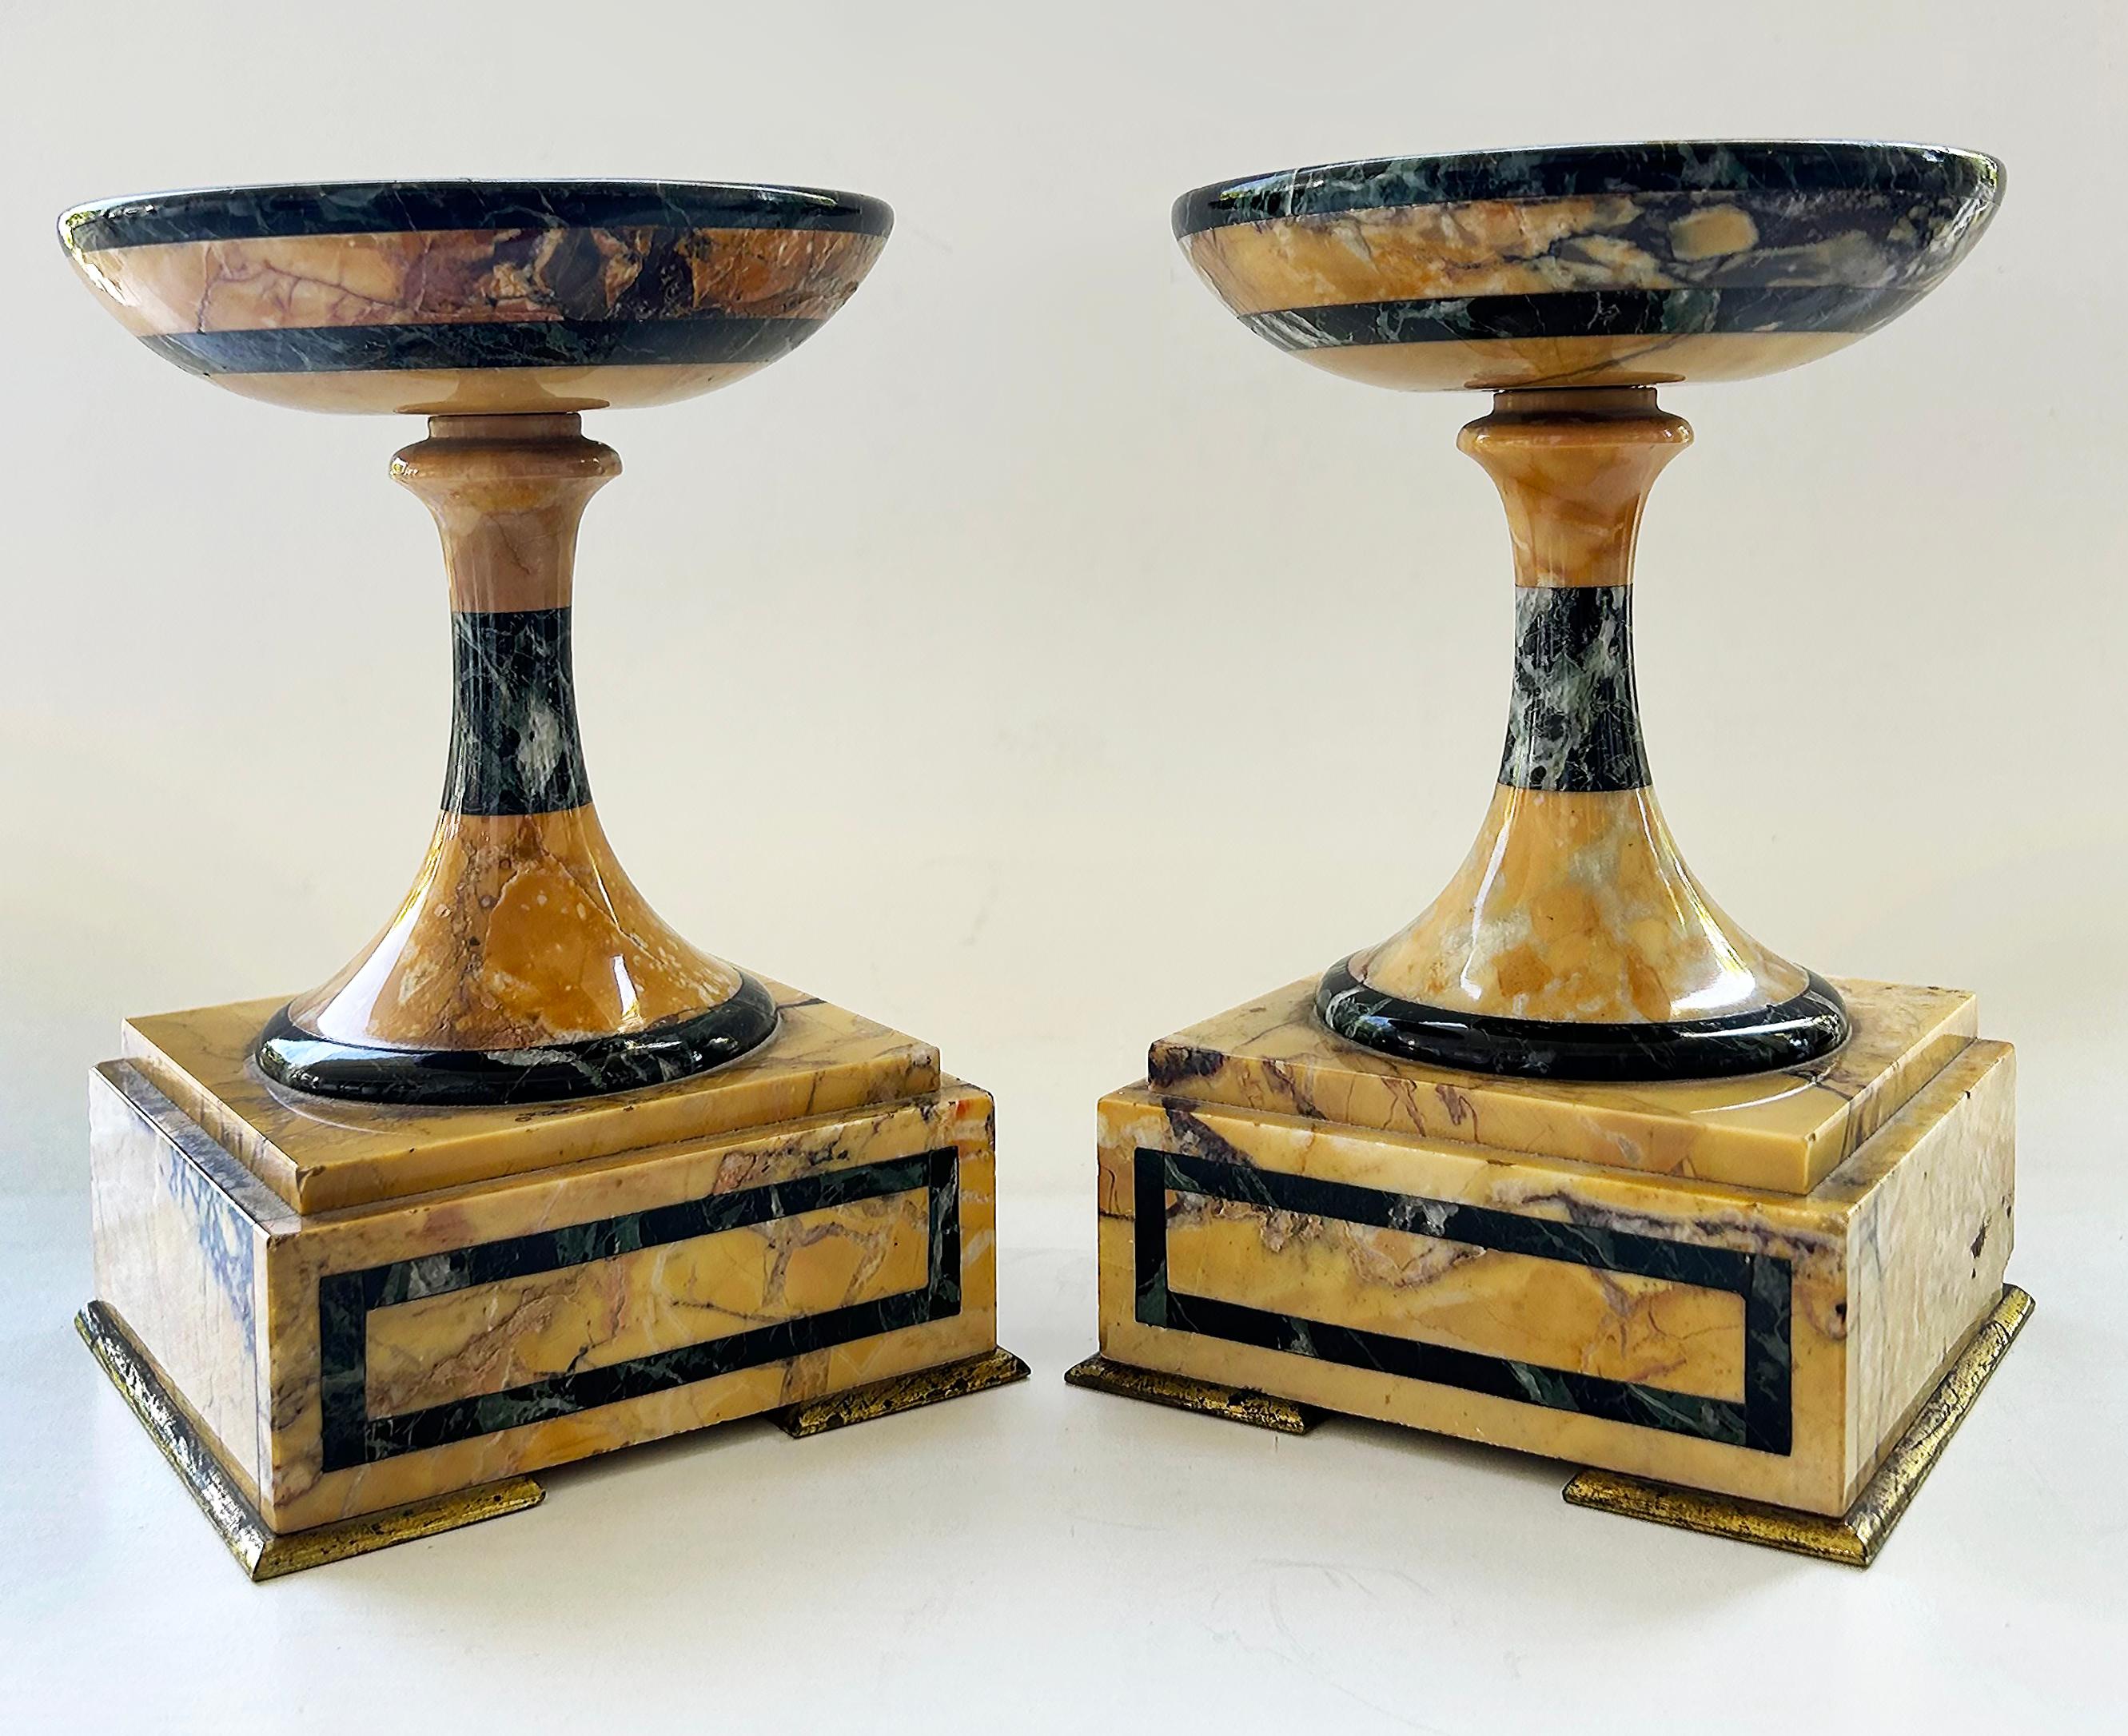 Italian Grand Tour Marble and Gilt Bronze Garniture Tazzas, a Pair

Offered for sale is a pair of Grand Tour tazzas made of variegated marble and bronze accents. The tazzas are created with richly veined Italian Sienna marble. the will make quite a